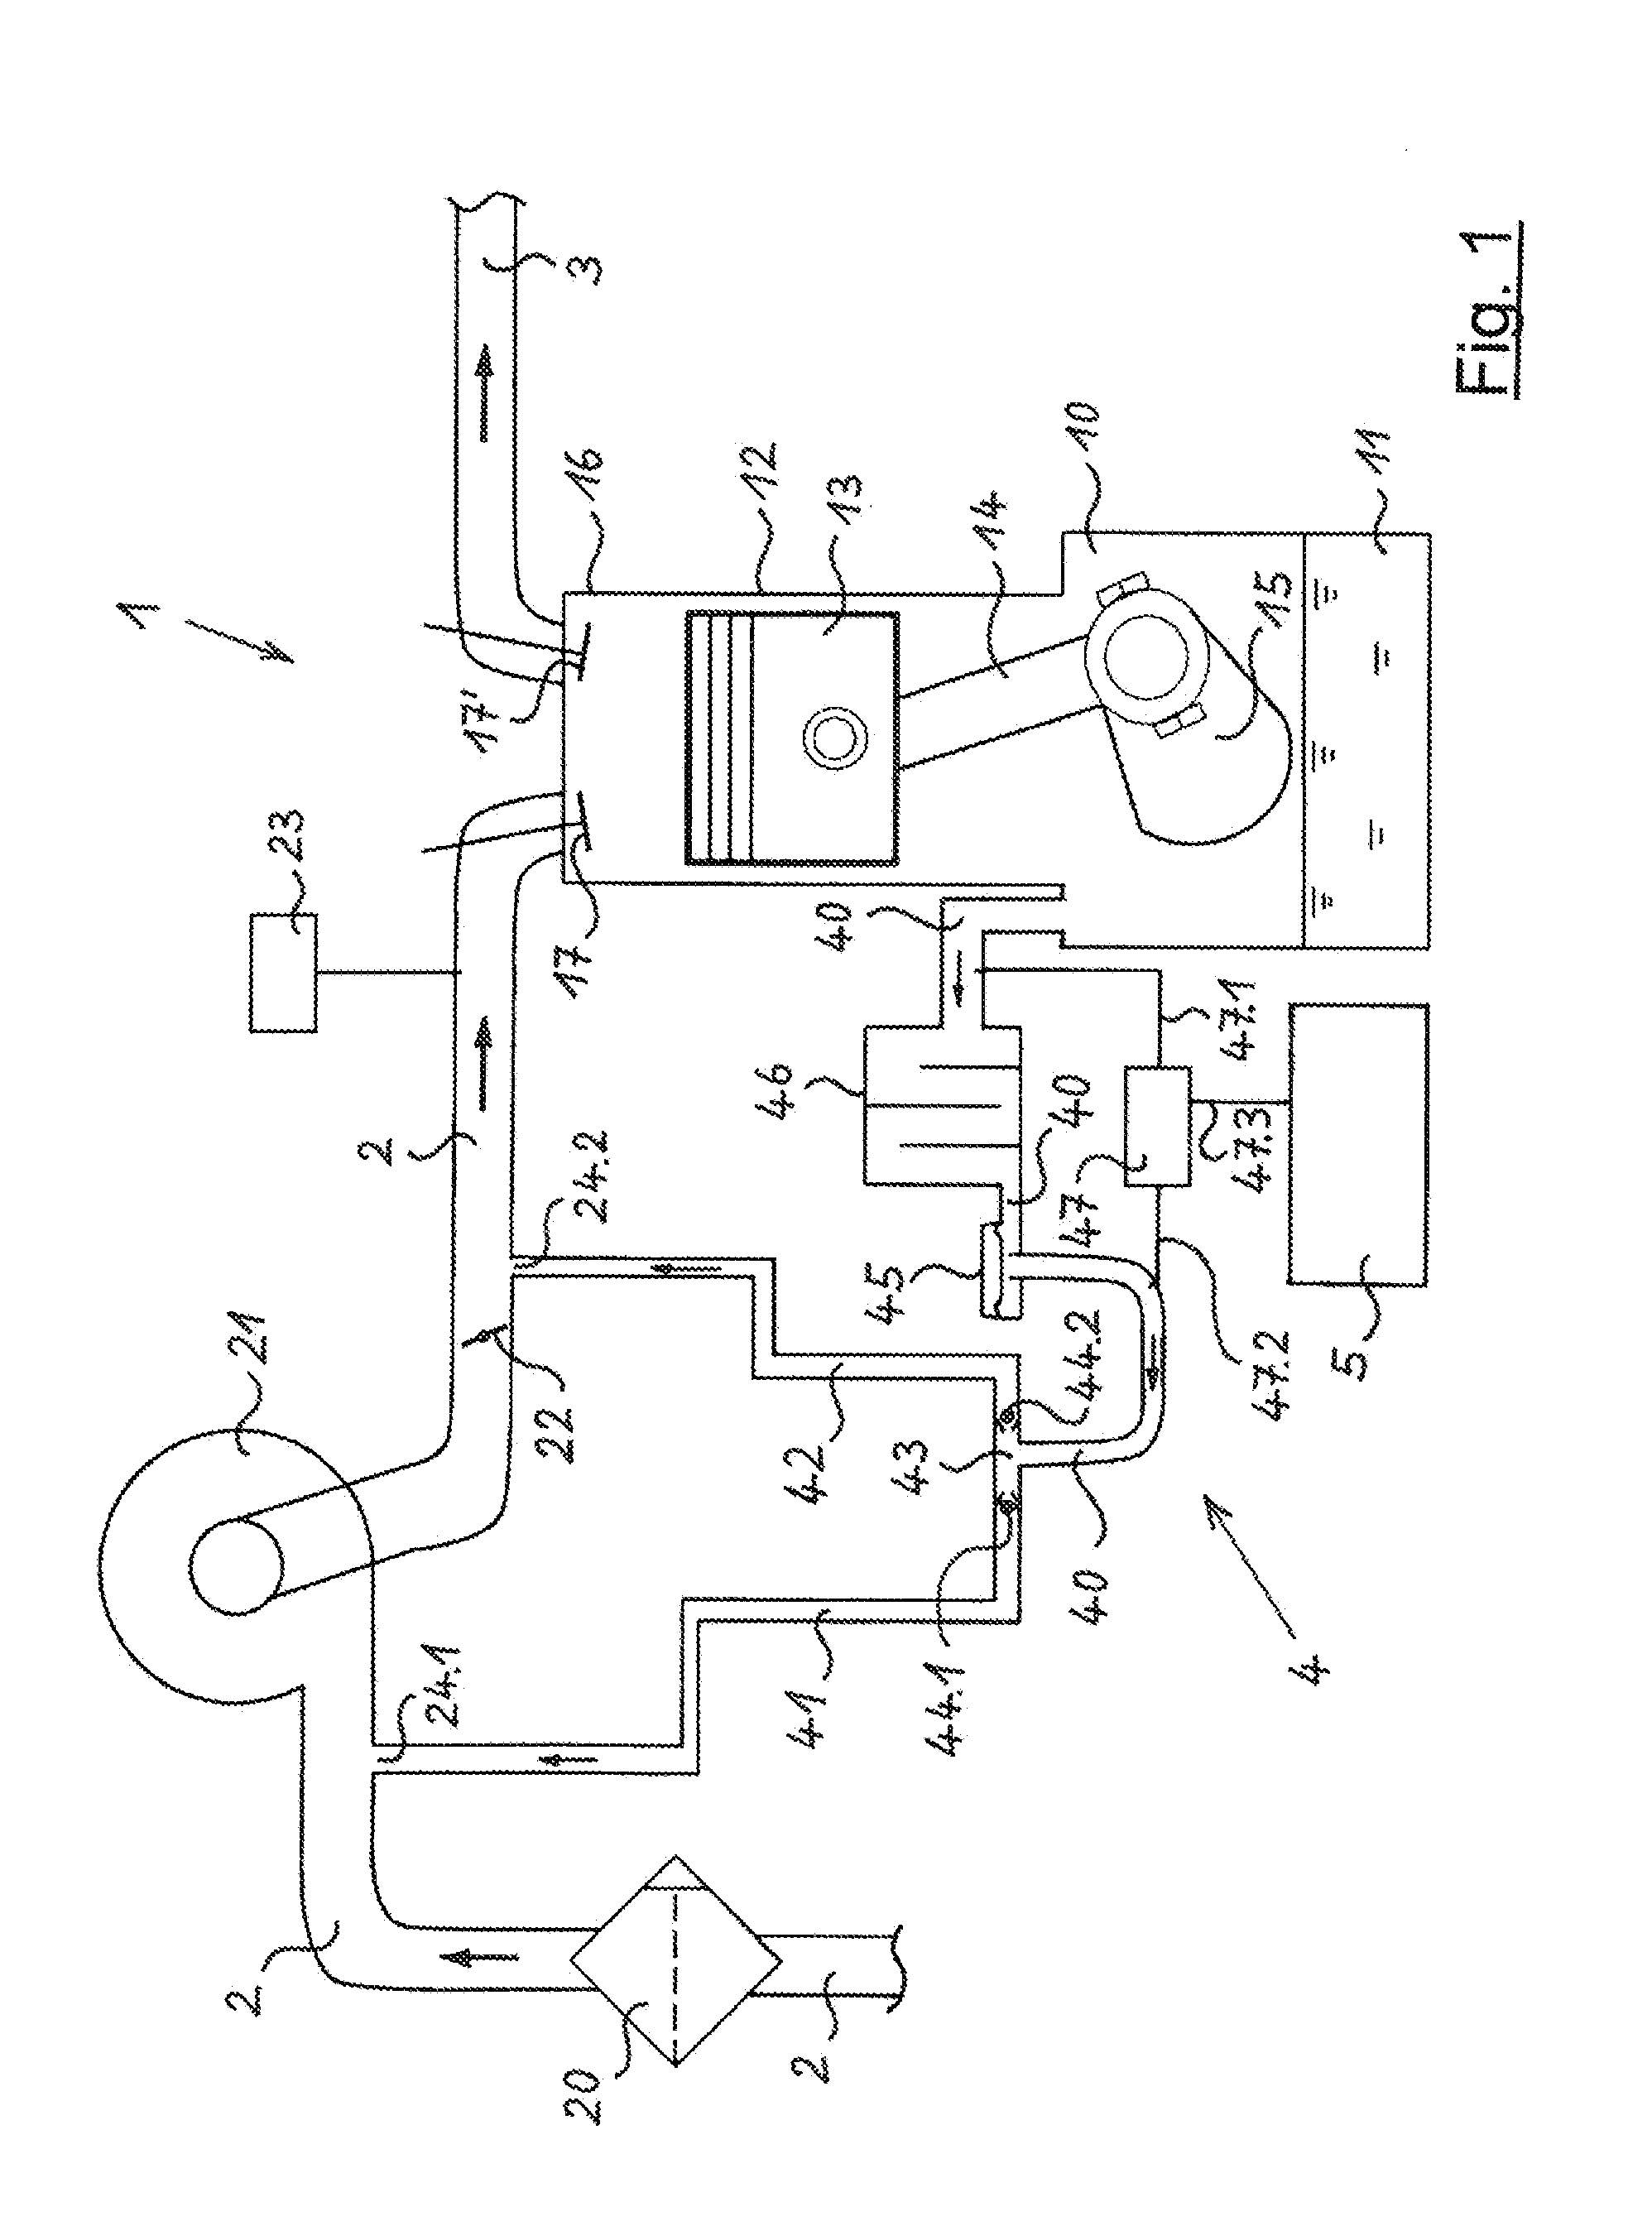 Internal combustion engine having a crankcase ventilation device, and method for monitoring a crankcase ventilation device